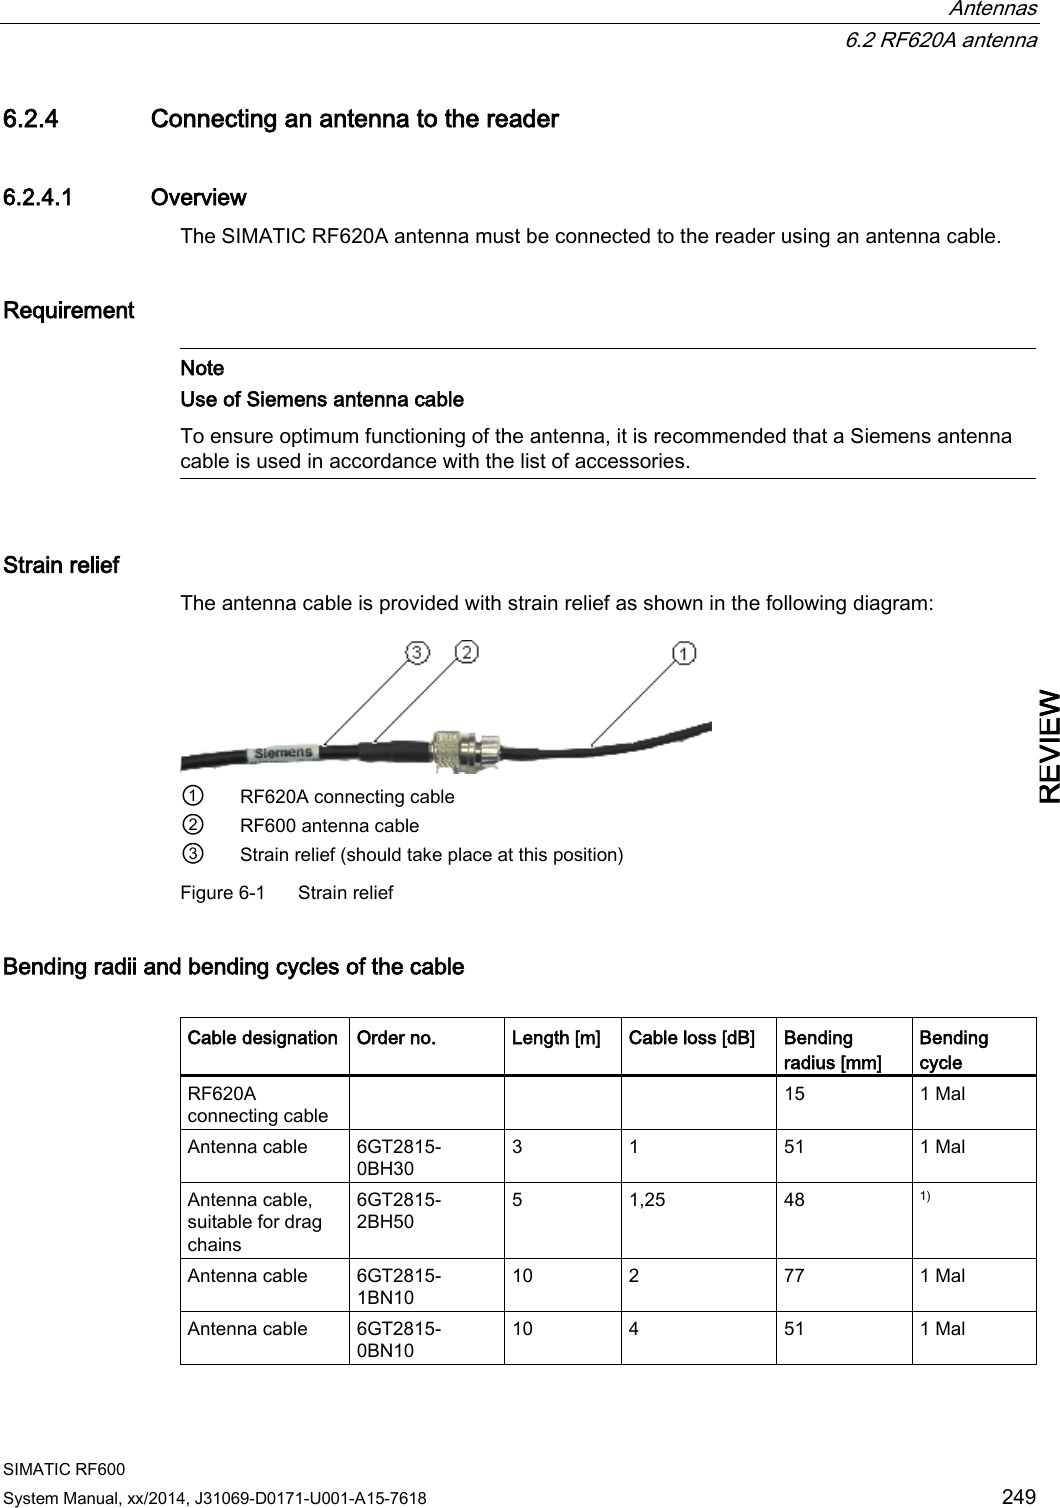  Antennas  6.2 RF620A antenna SIMATIC RF600 System Manual, xx/2014, J31069-D0171-U001-A15-7618 249 REVIEW 6.2.4 Connecting an antenna to the reader 6.2.4.1 Overview The SIMATIC RF620A antenna must be connected to the reader using an antenna cable. Requirement   Note Use of Siemens antenna cable To ensure optimum functioning of the antenna, it is recommended that a Siemens antenna cable is used in accordance with the list of accessories.   Strain relief The antenna cable is provided with strain relief as shown in the following diagram:  ① RF620A connecting cable ② RF600 antenna cable ③ Strain relief (should take place at this position) Figure 6-1  Strain relief Bending radii and bending cycles of the cable  Cable designation Order no. Length [m] Cable loss [dB] Bending radius [mm] Bending cycle RF620A connecting cable    15 1 Mal Antenna cable  6GT2815-0BH30 3  1  51 1 Mal Antenna cable, suitable for drag chains 6GT2815-2BH50 5  1,25 48 1) Antenna cable  6GT2815-1BN10 10  2  77 1 Mal Antenna cable 6GT2815-0BN10 10  4  51 1 Mal 